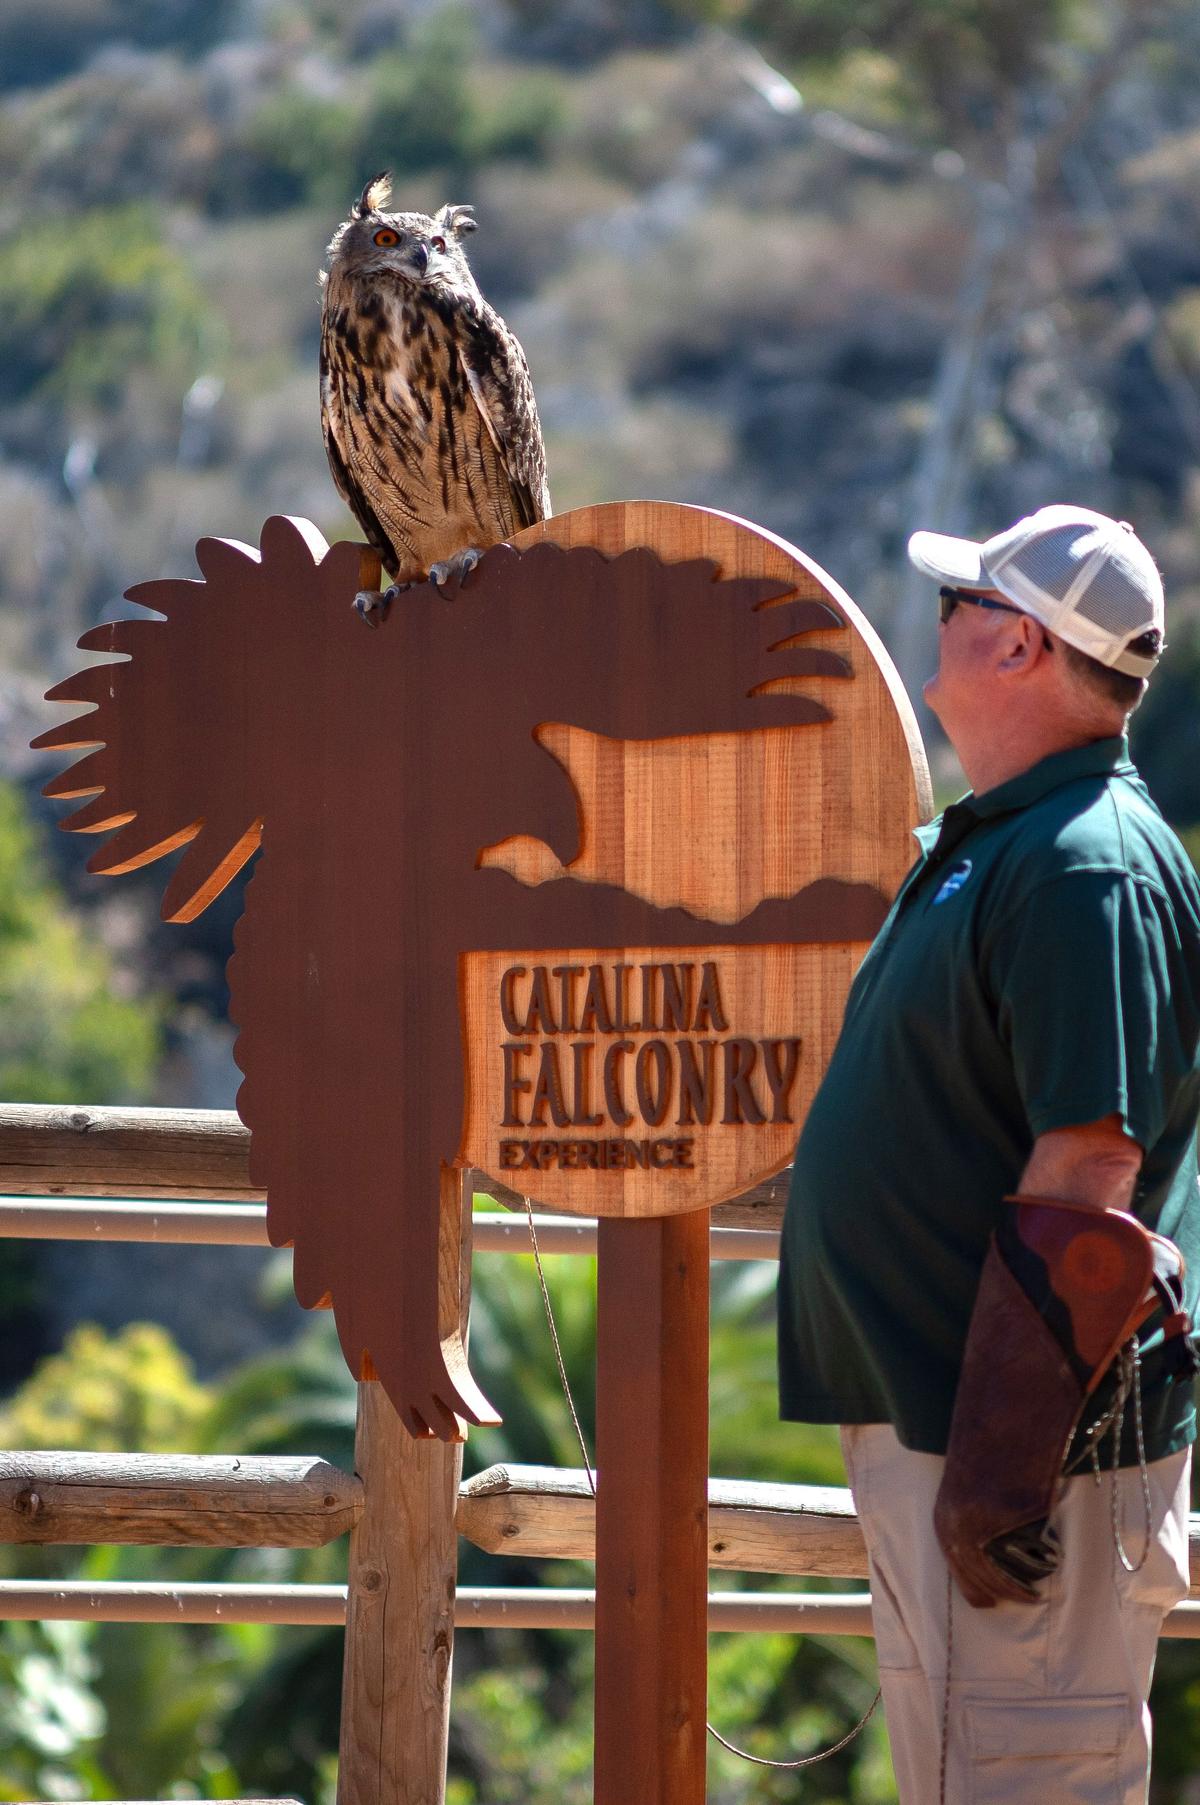 Falconer Dave Long and his Eurasian eagle-owl at the Catalina Falconry Experience in Descanso Beach. (Jeff Perkin for American Essence)